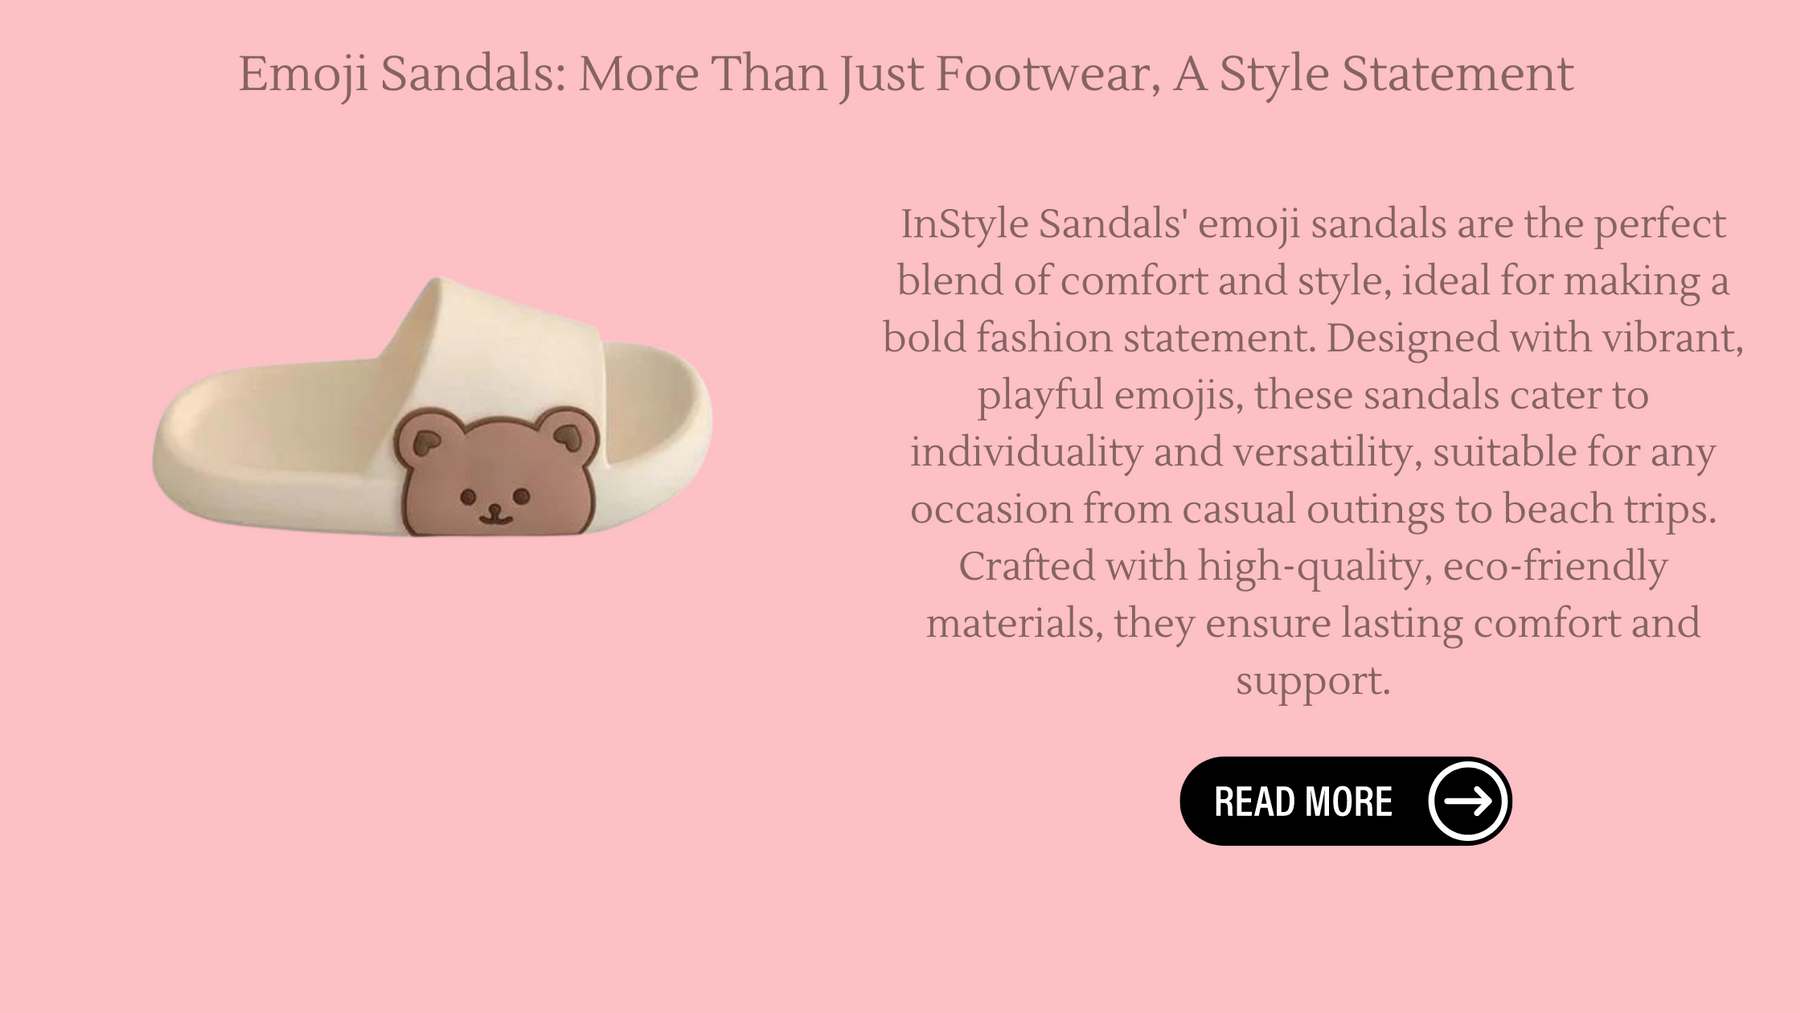 Emoji Sandals: More Than Just Footwear, A Style Statement